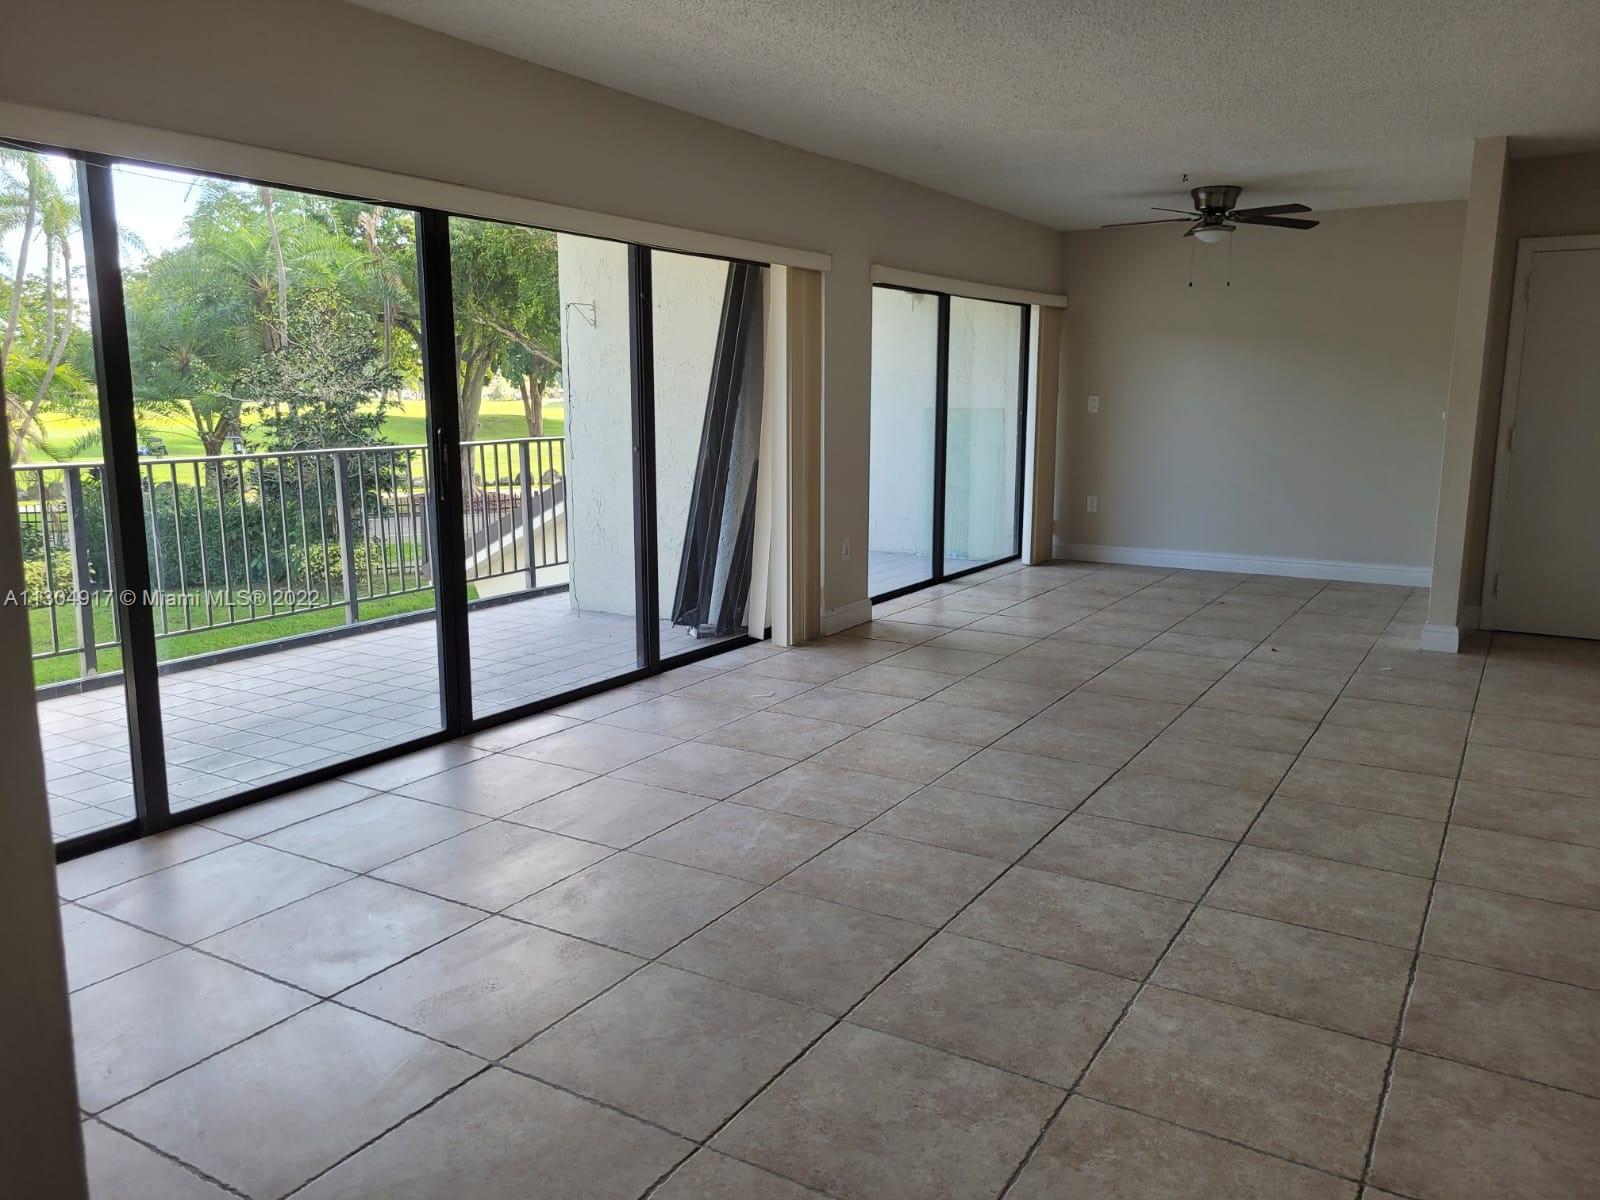 Photo 2 of Racquet Club Of Kendale La Apt 102 in Miami - MLS A11304917